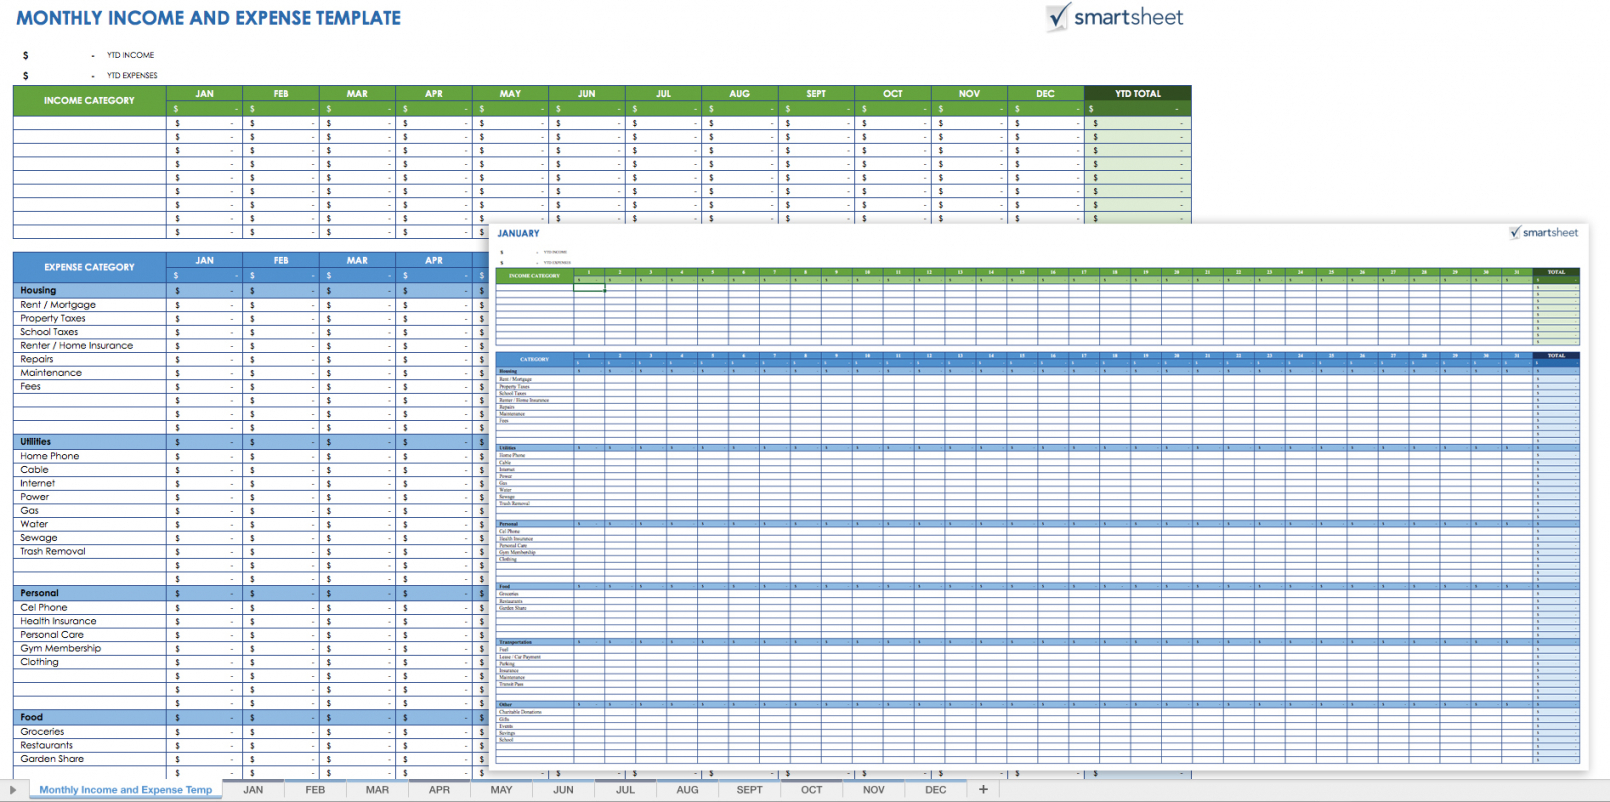 Independent Contractor Expenses Spreadsheet Design Of Free Expense for Independent Contractor Expenses Spreadsheet